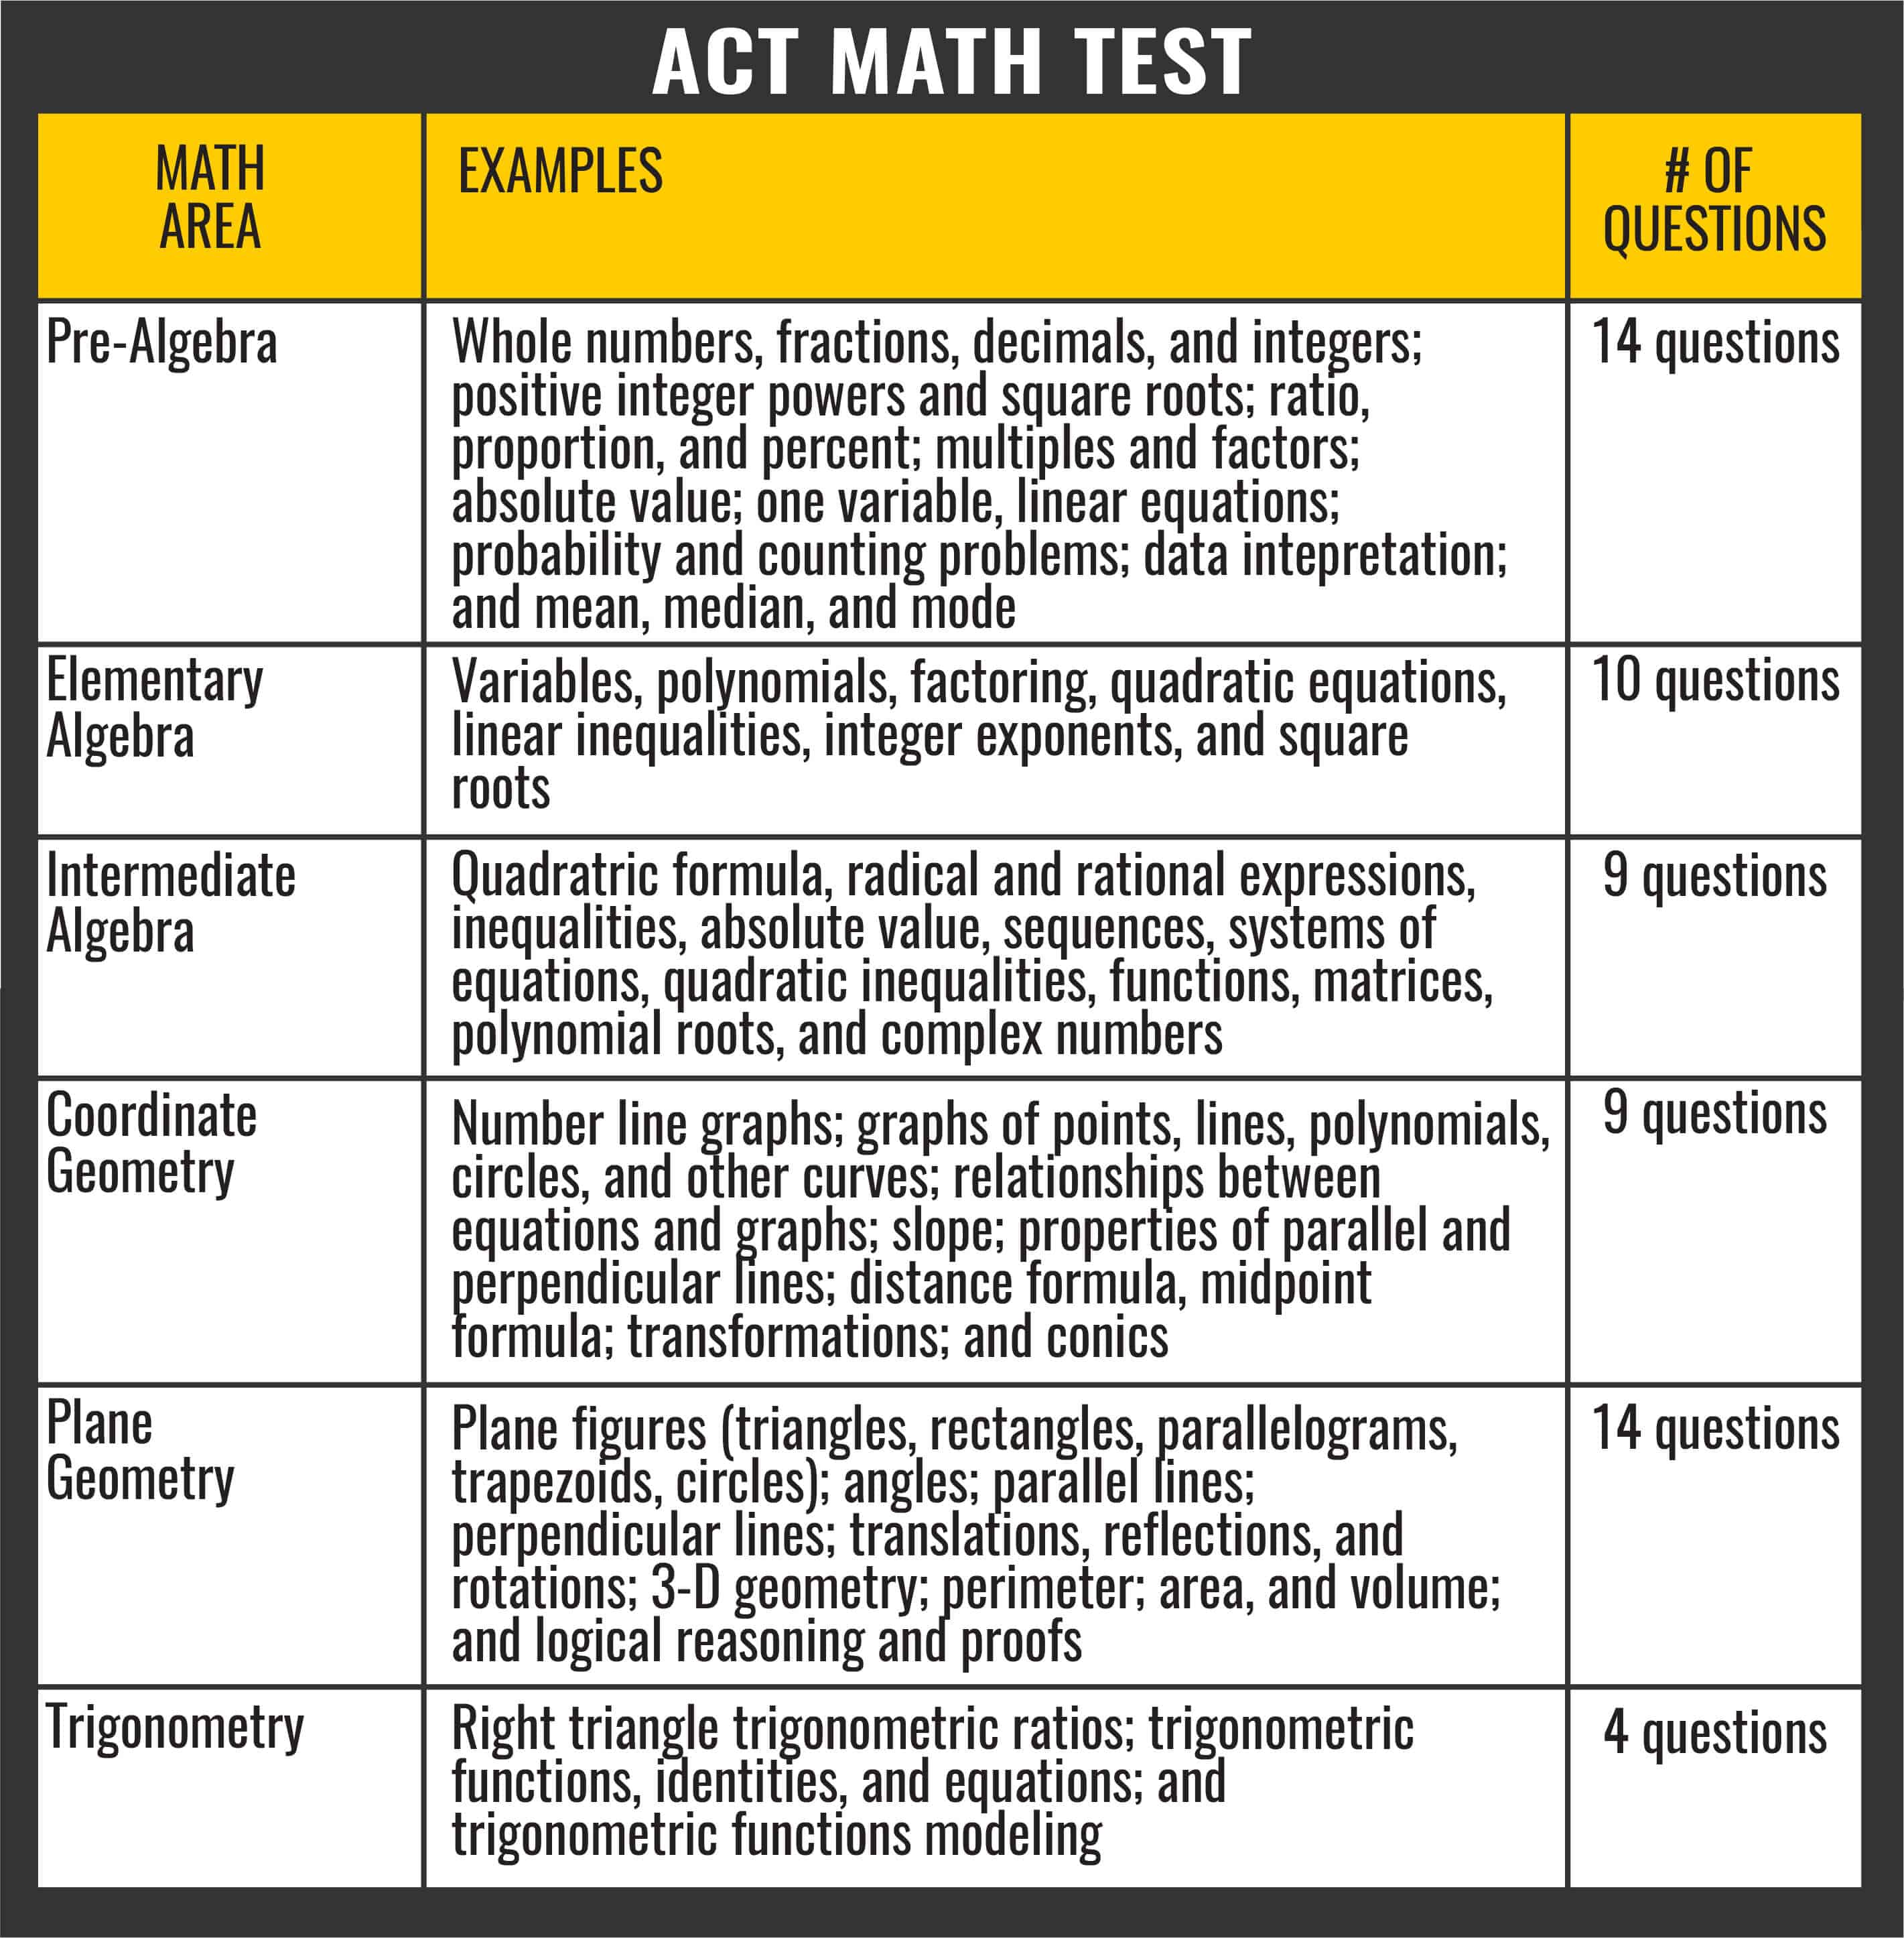 ACT Math Section